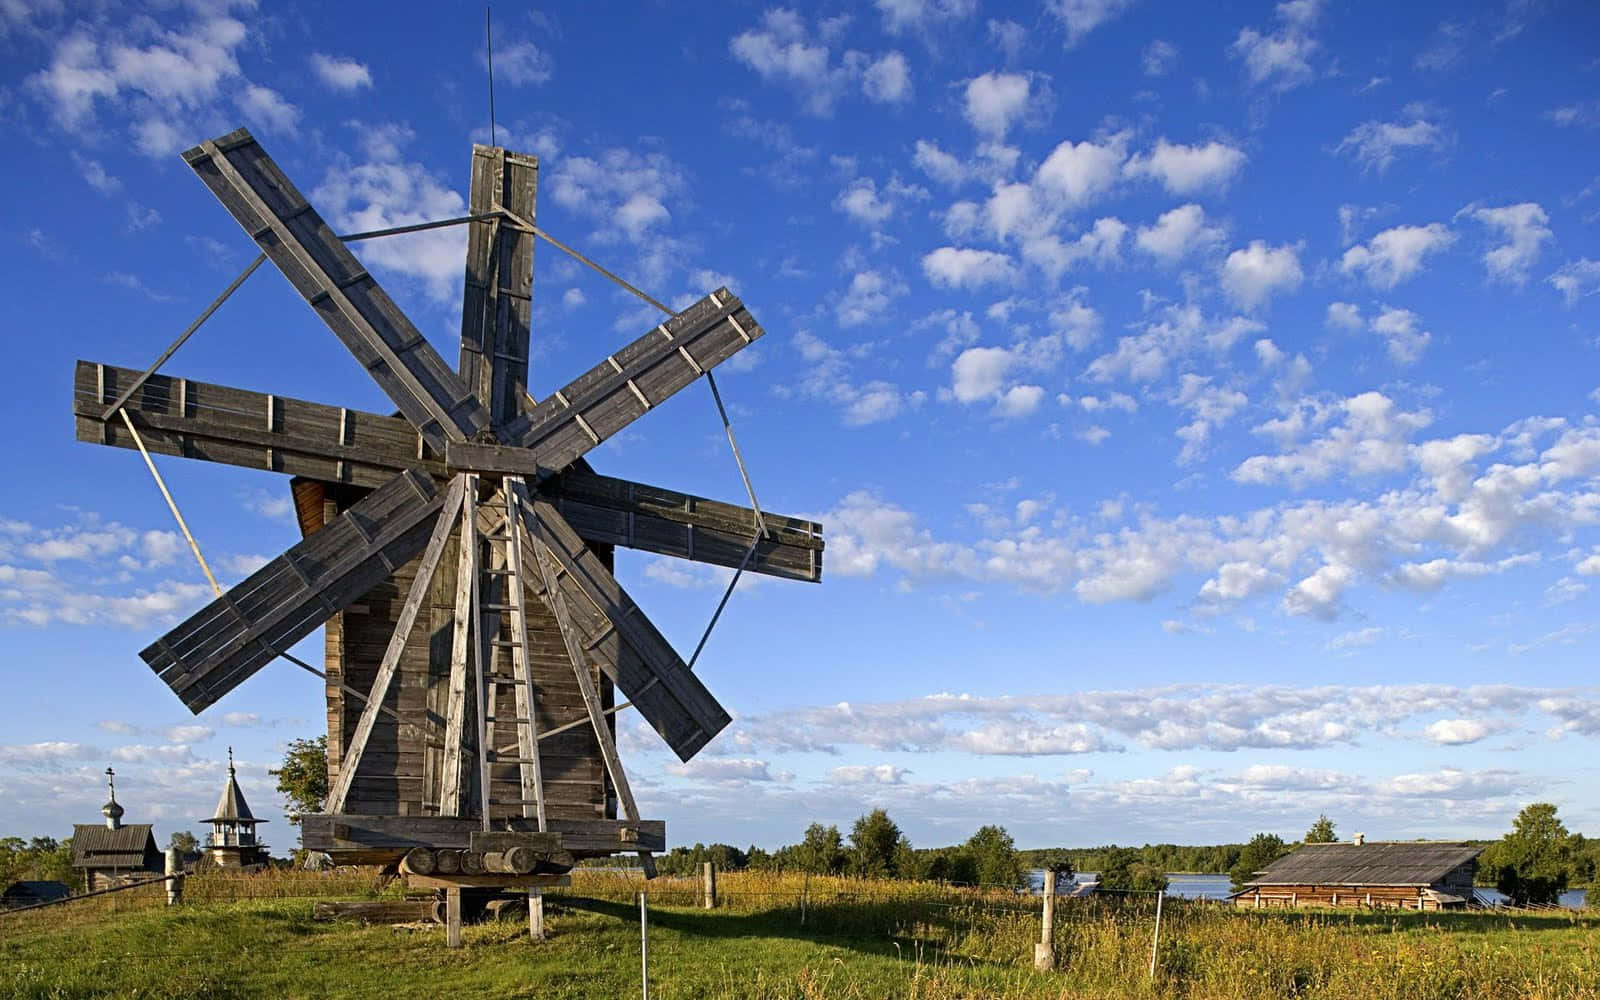 A Wooden Windmill Is Standing In A Field